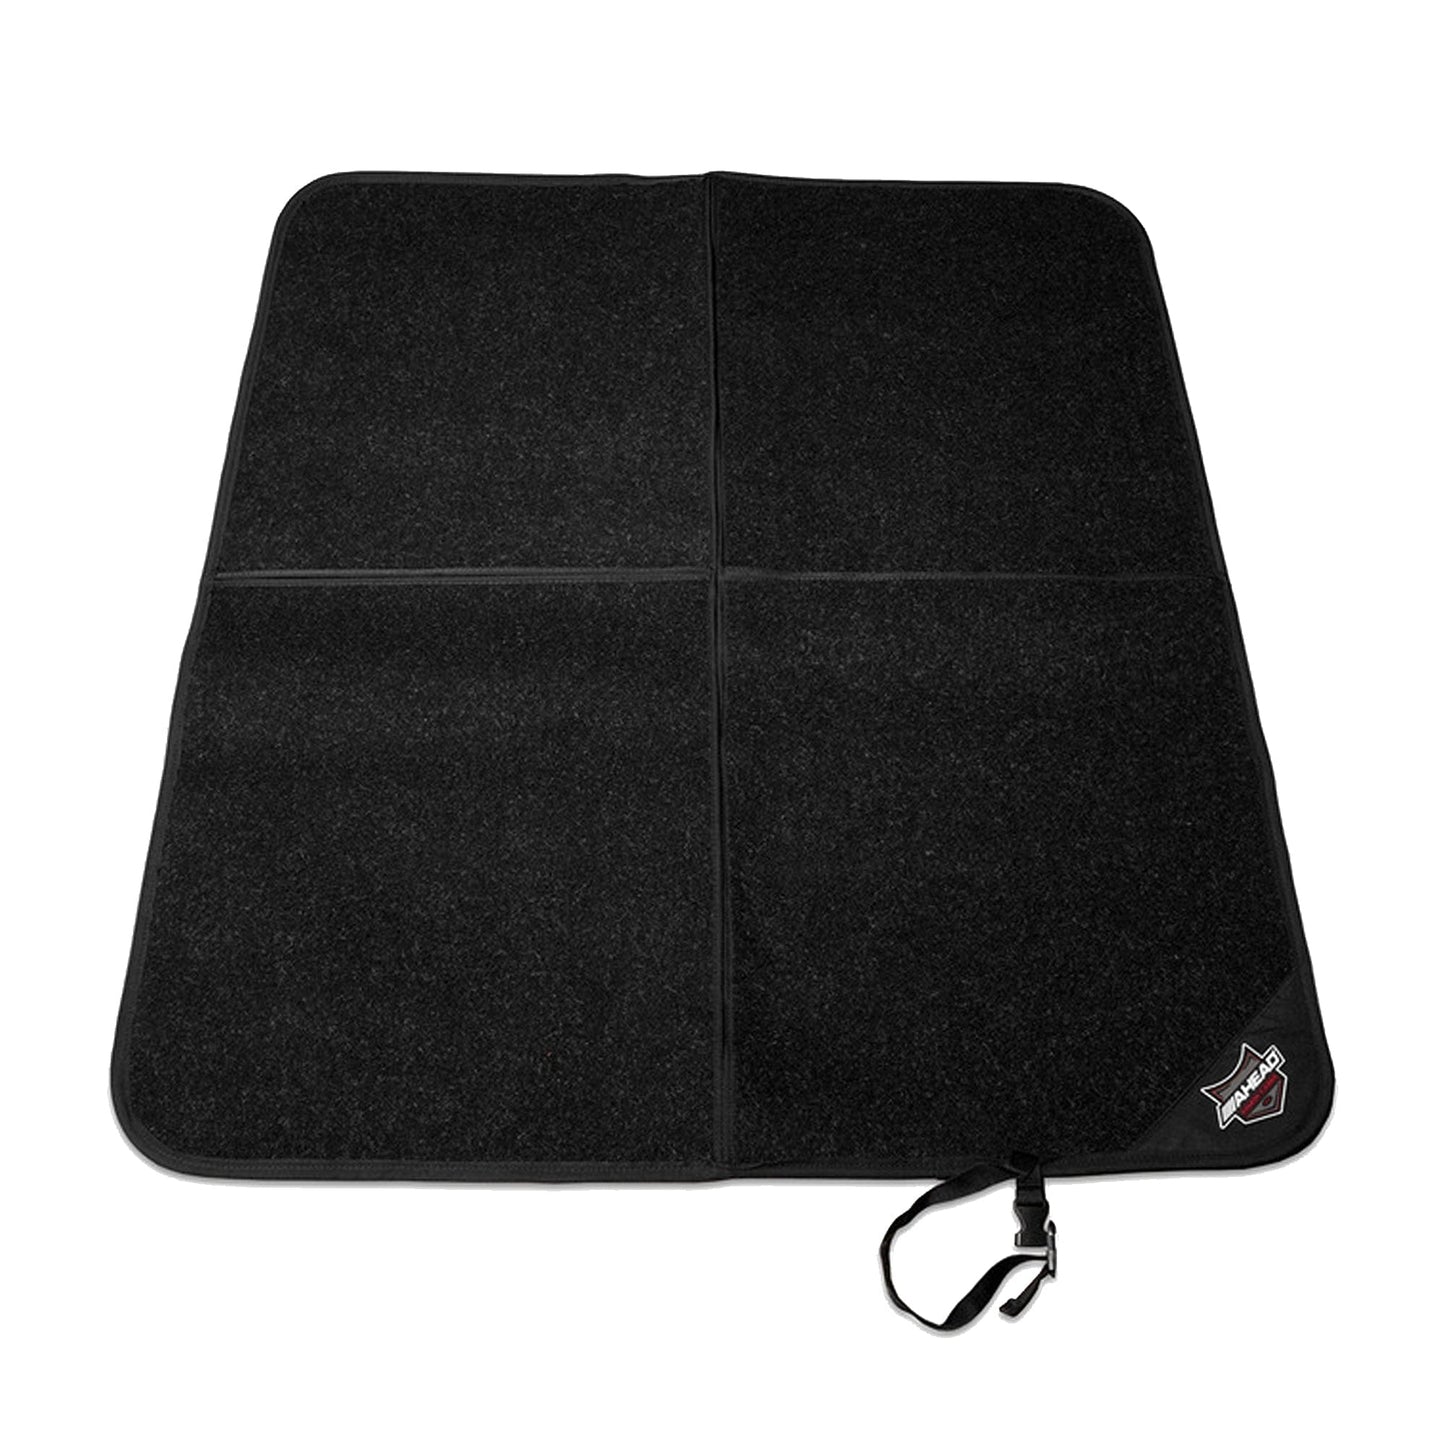 Ahead Armor 48x55" Electronic Drum Mat Standard Drums and Percussion / Parts and Accessories / Drum Parts